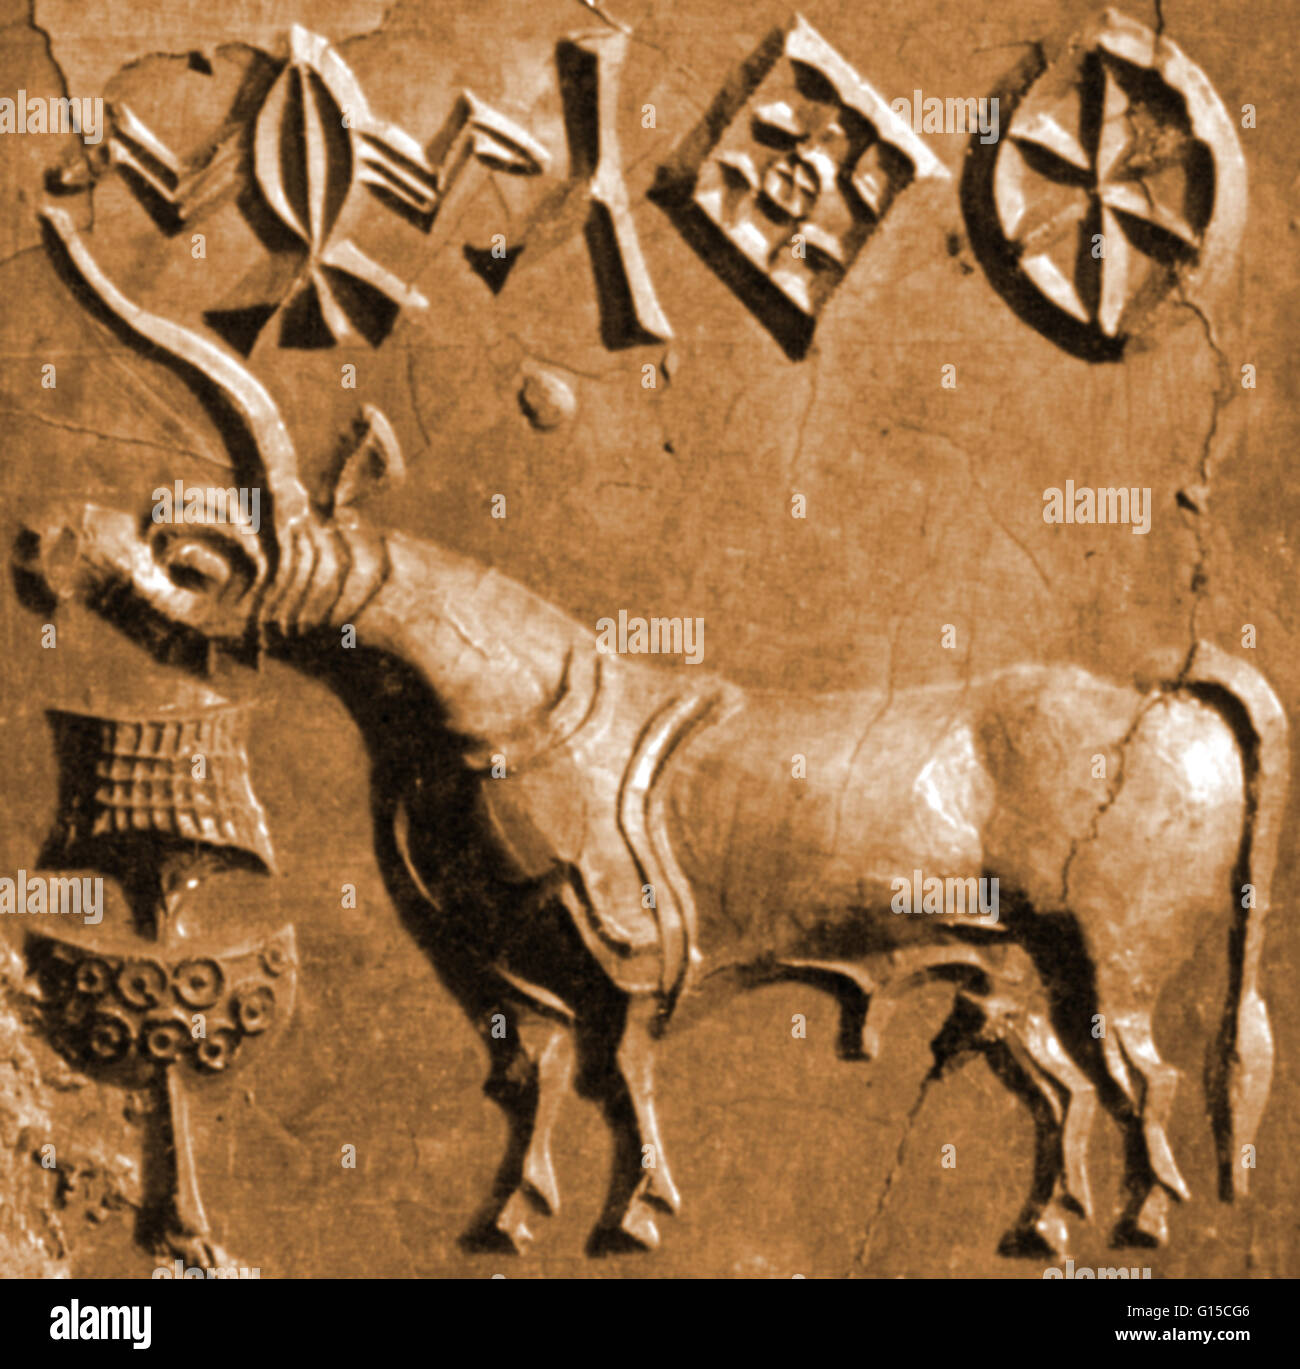 a-seal-with-a-unicorn-relief-found-in-mohenjo-daro-mound-of-the-dead-G15CG6.jpg